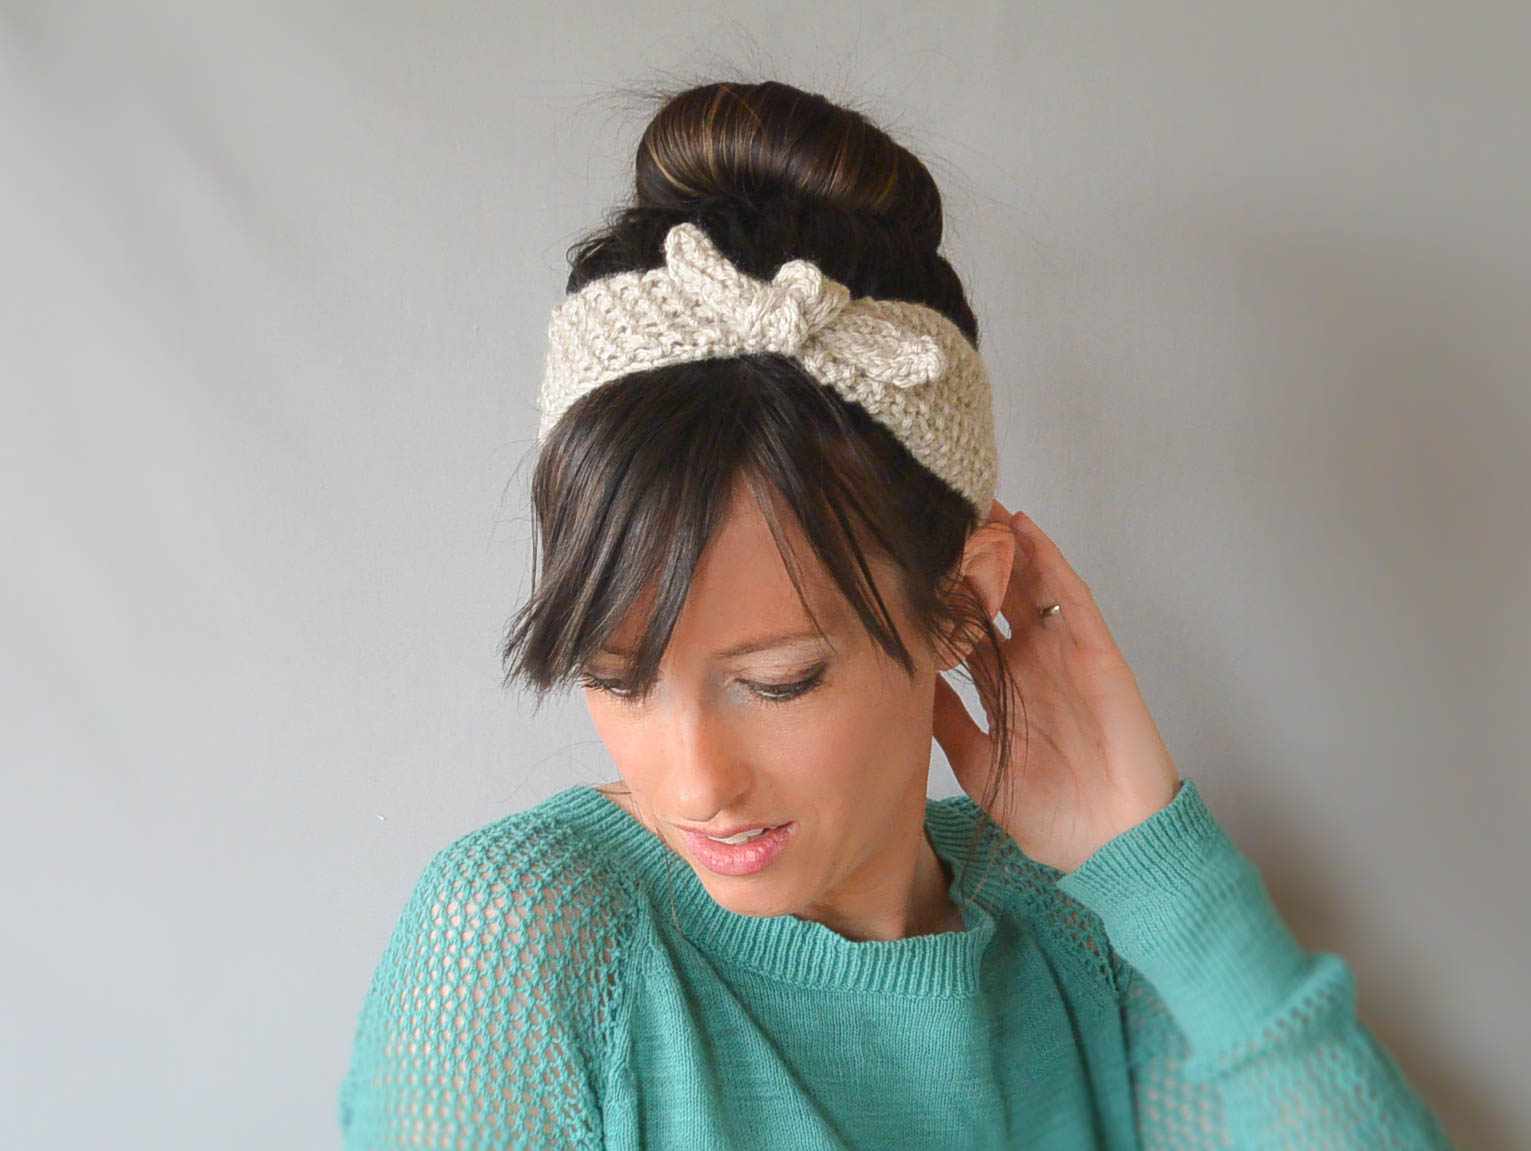 Knitting Patterns Headbands Knit Headband To Style Your Hair Crochet And Knitting Patterns 2019